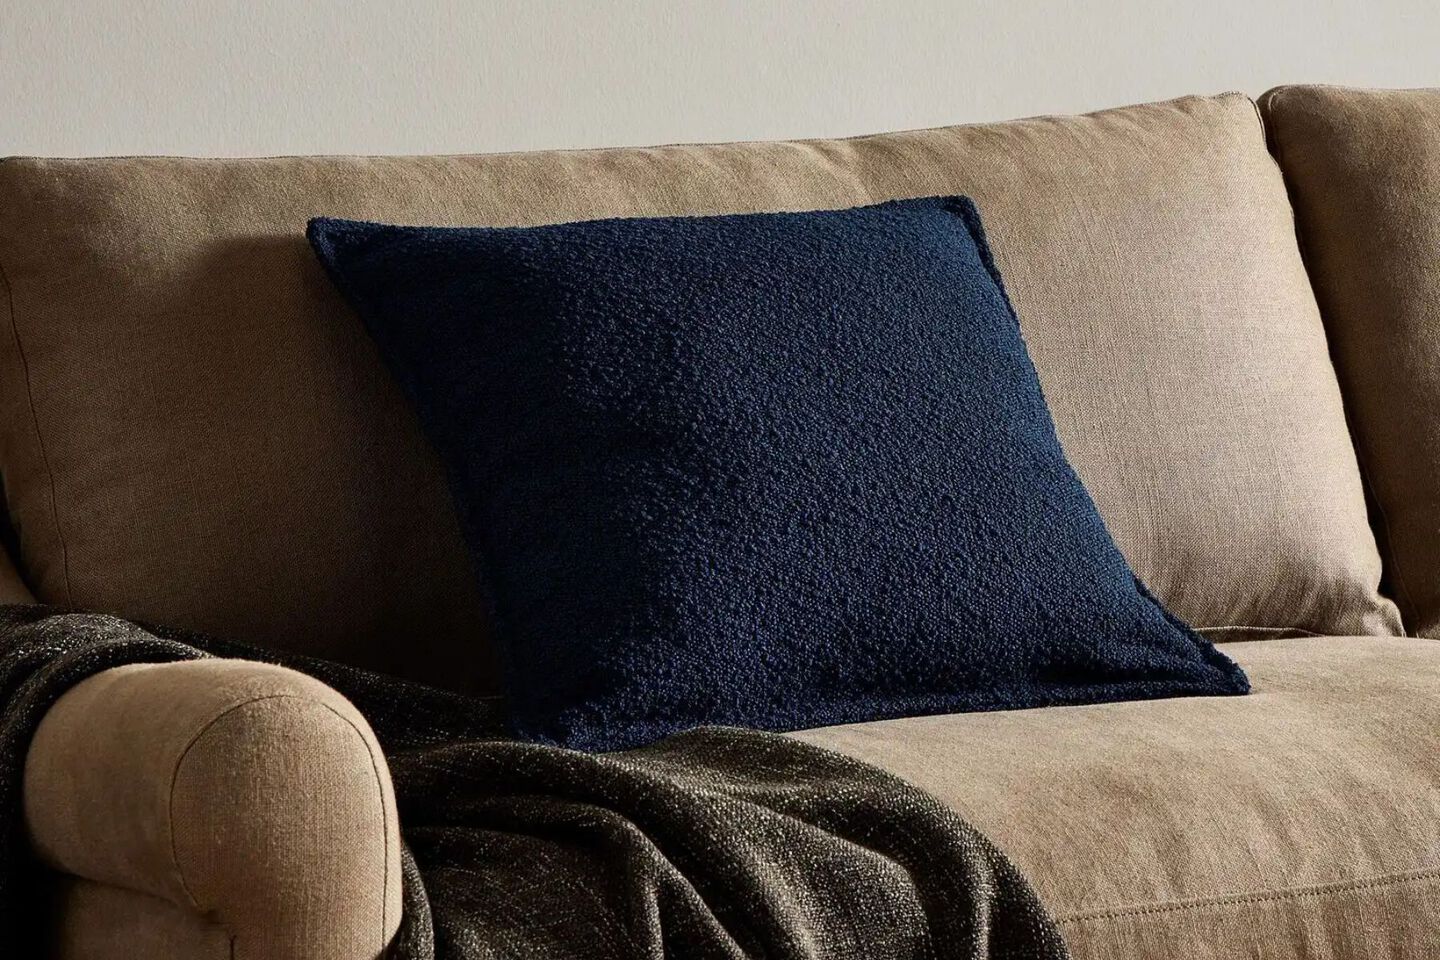 Single navy pillow sitting on a brown couch with a dark brown blanket